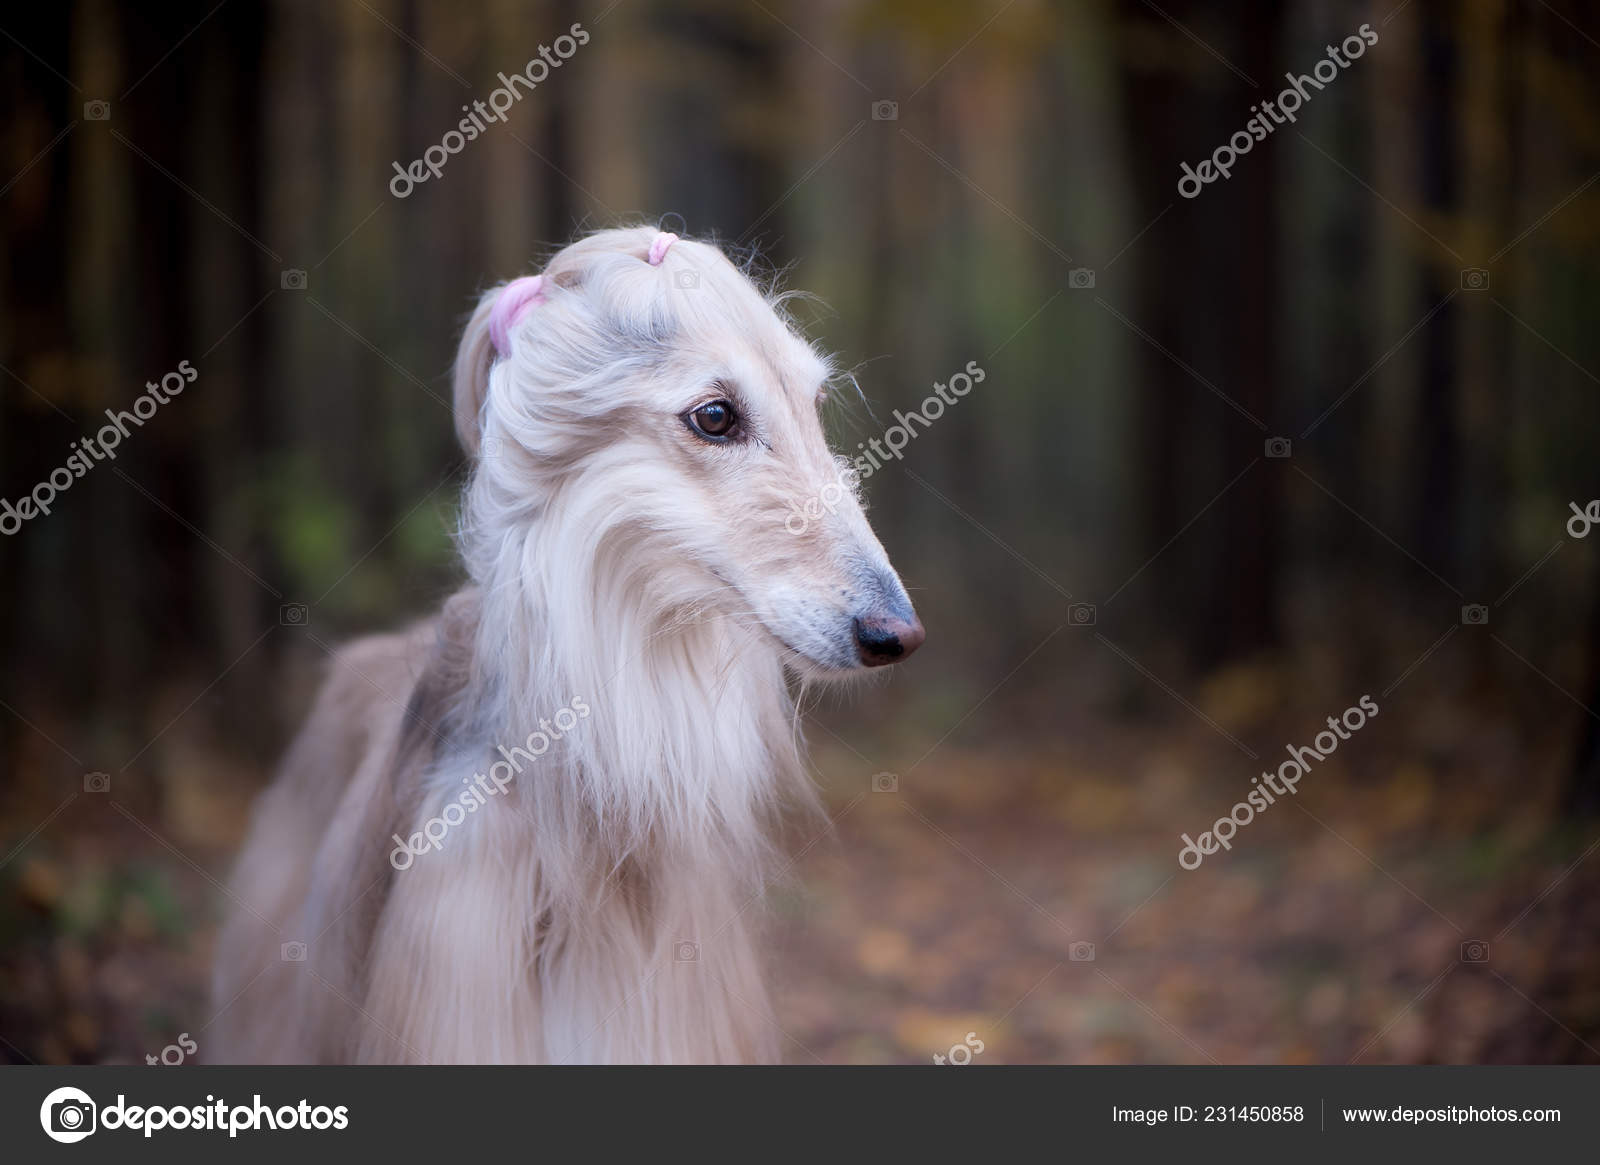 Dog Gorgeous Afghan Hound Original Fitness Hairstyle